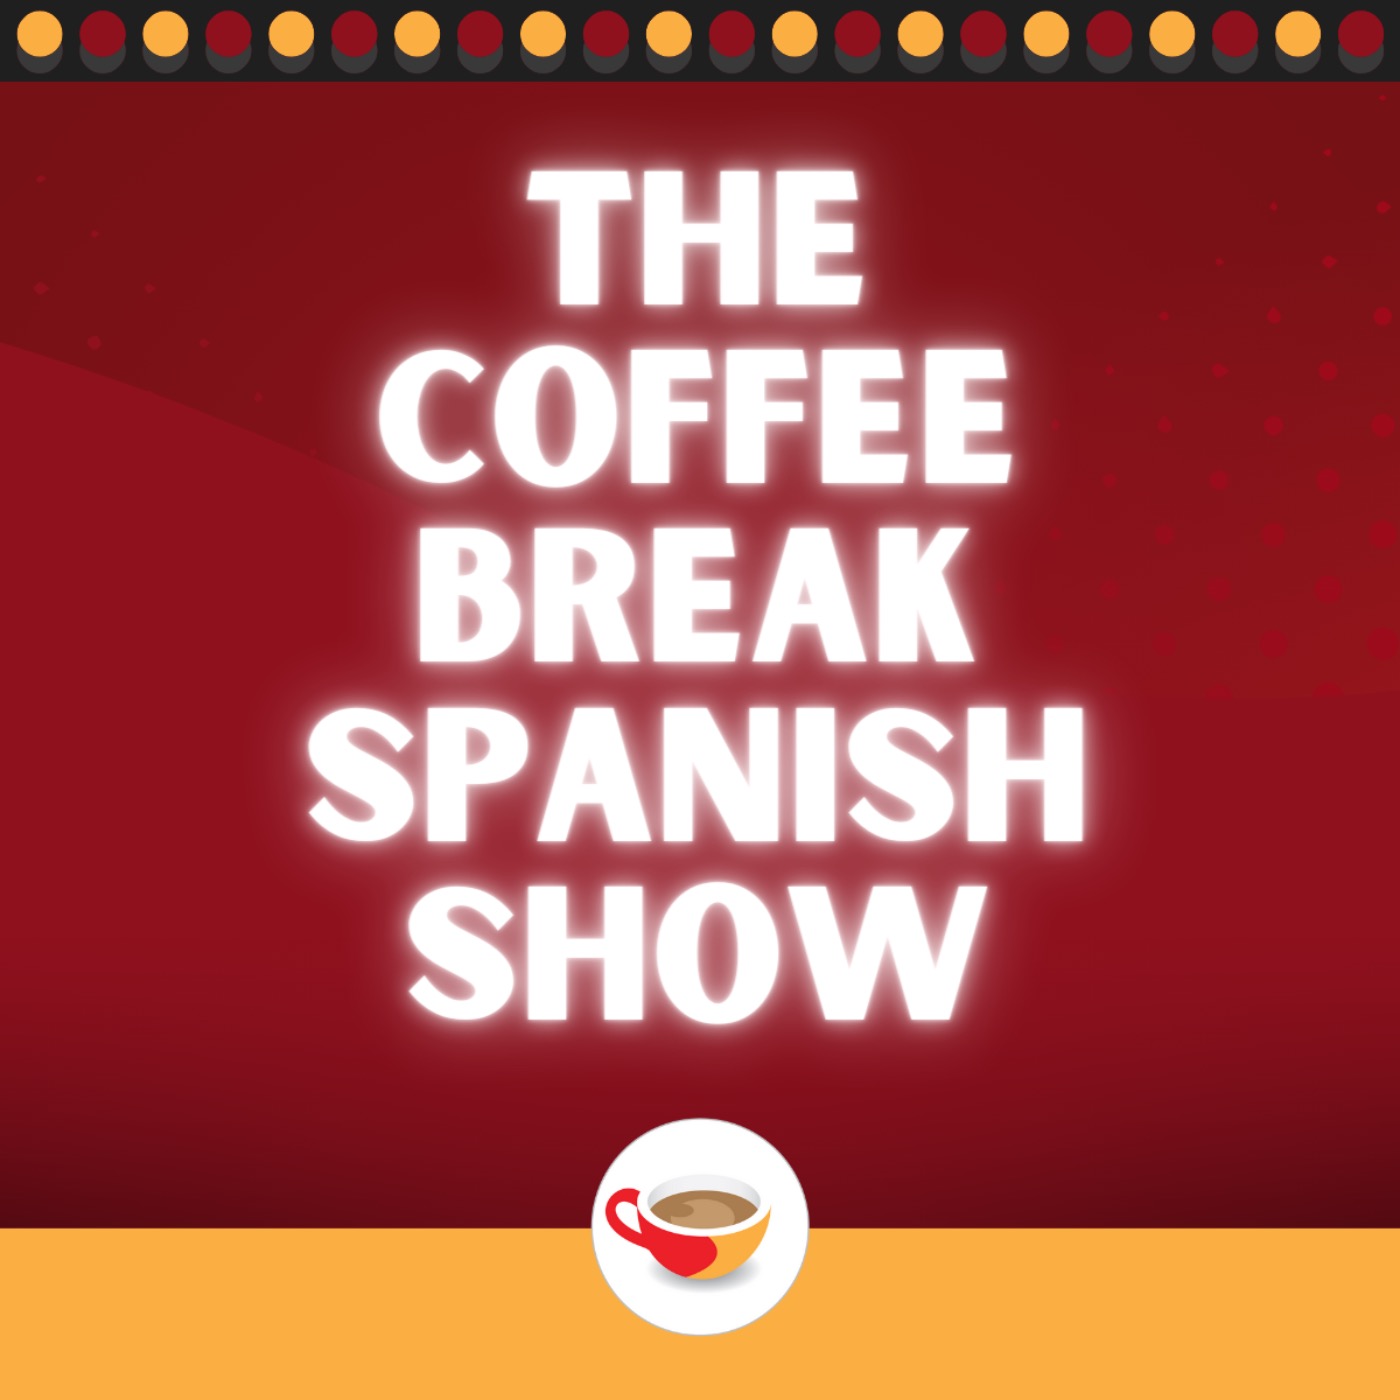 How to say ’I like’ in Spanish - Using ’gustar’ in any tense | The Coffee Break Spanish Show 1.03